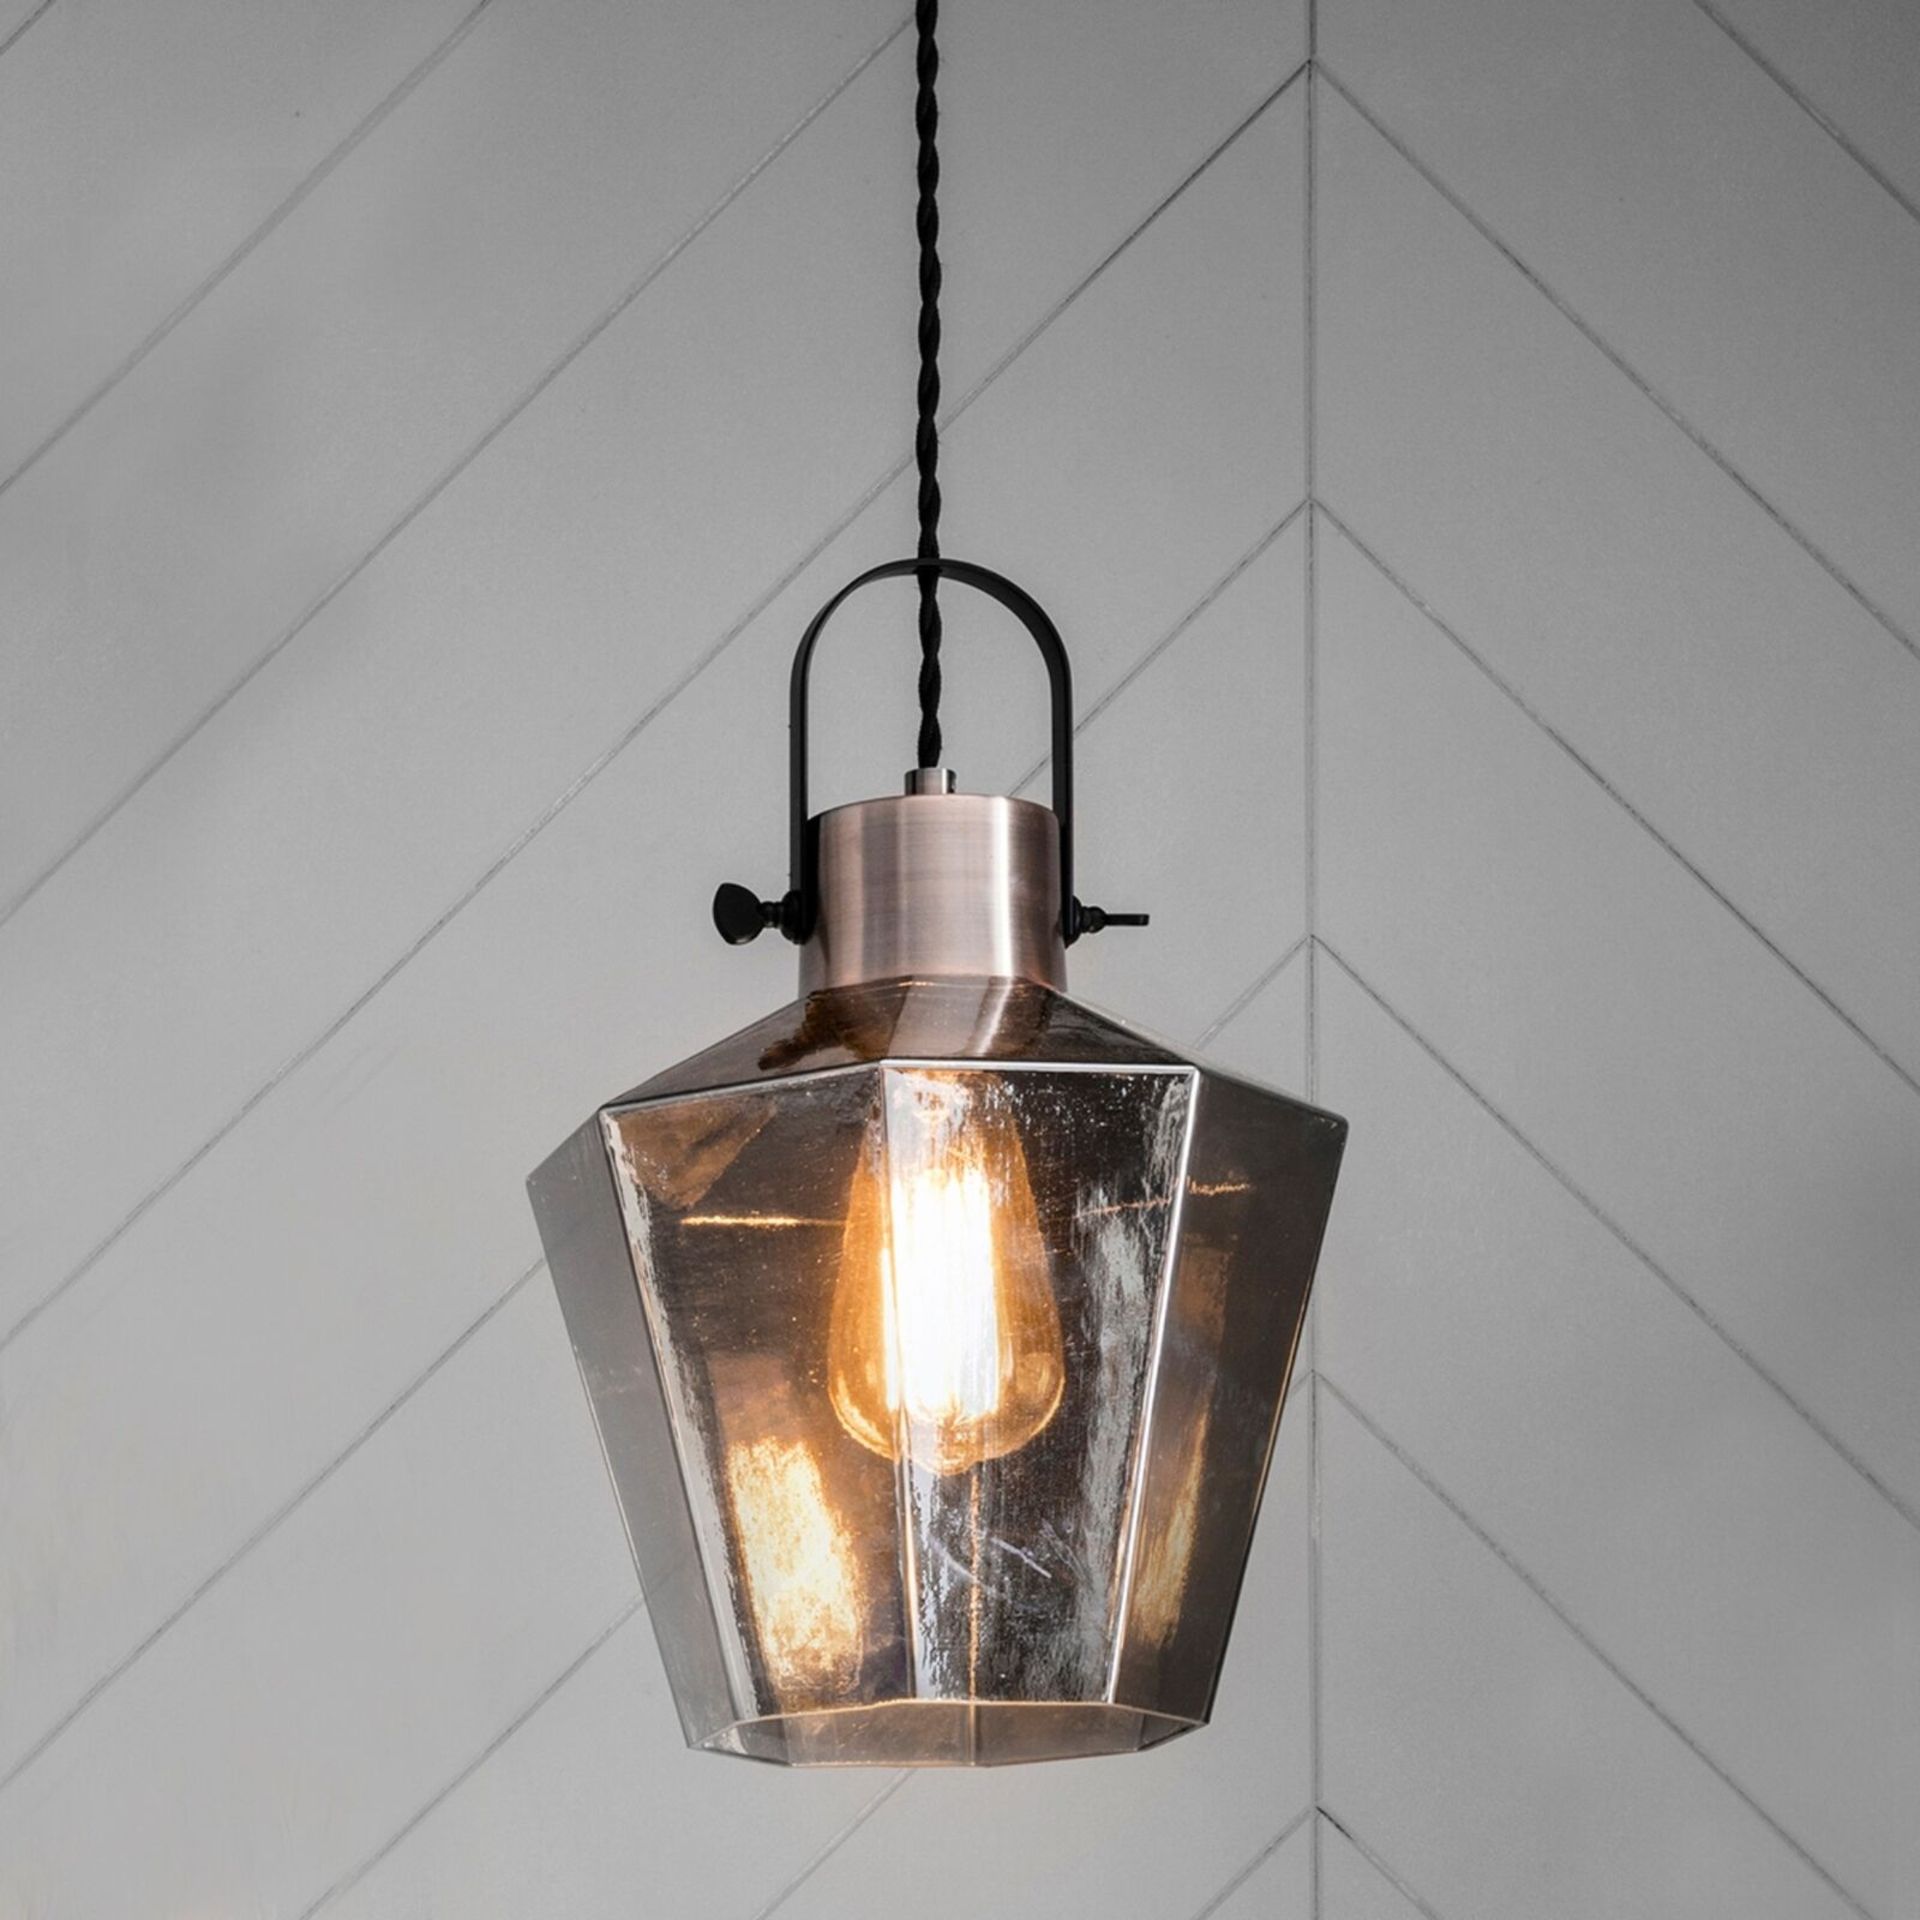 Atlanta Pendant Light Complete your stylish interior with this distressed glass pendant light